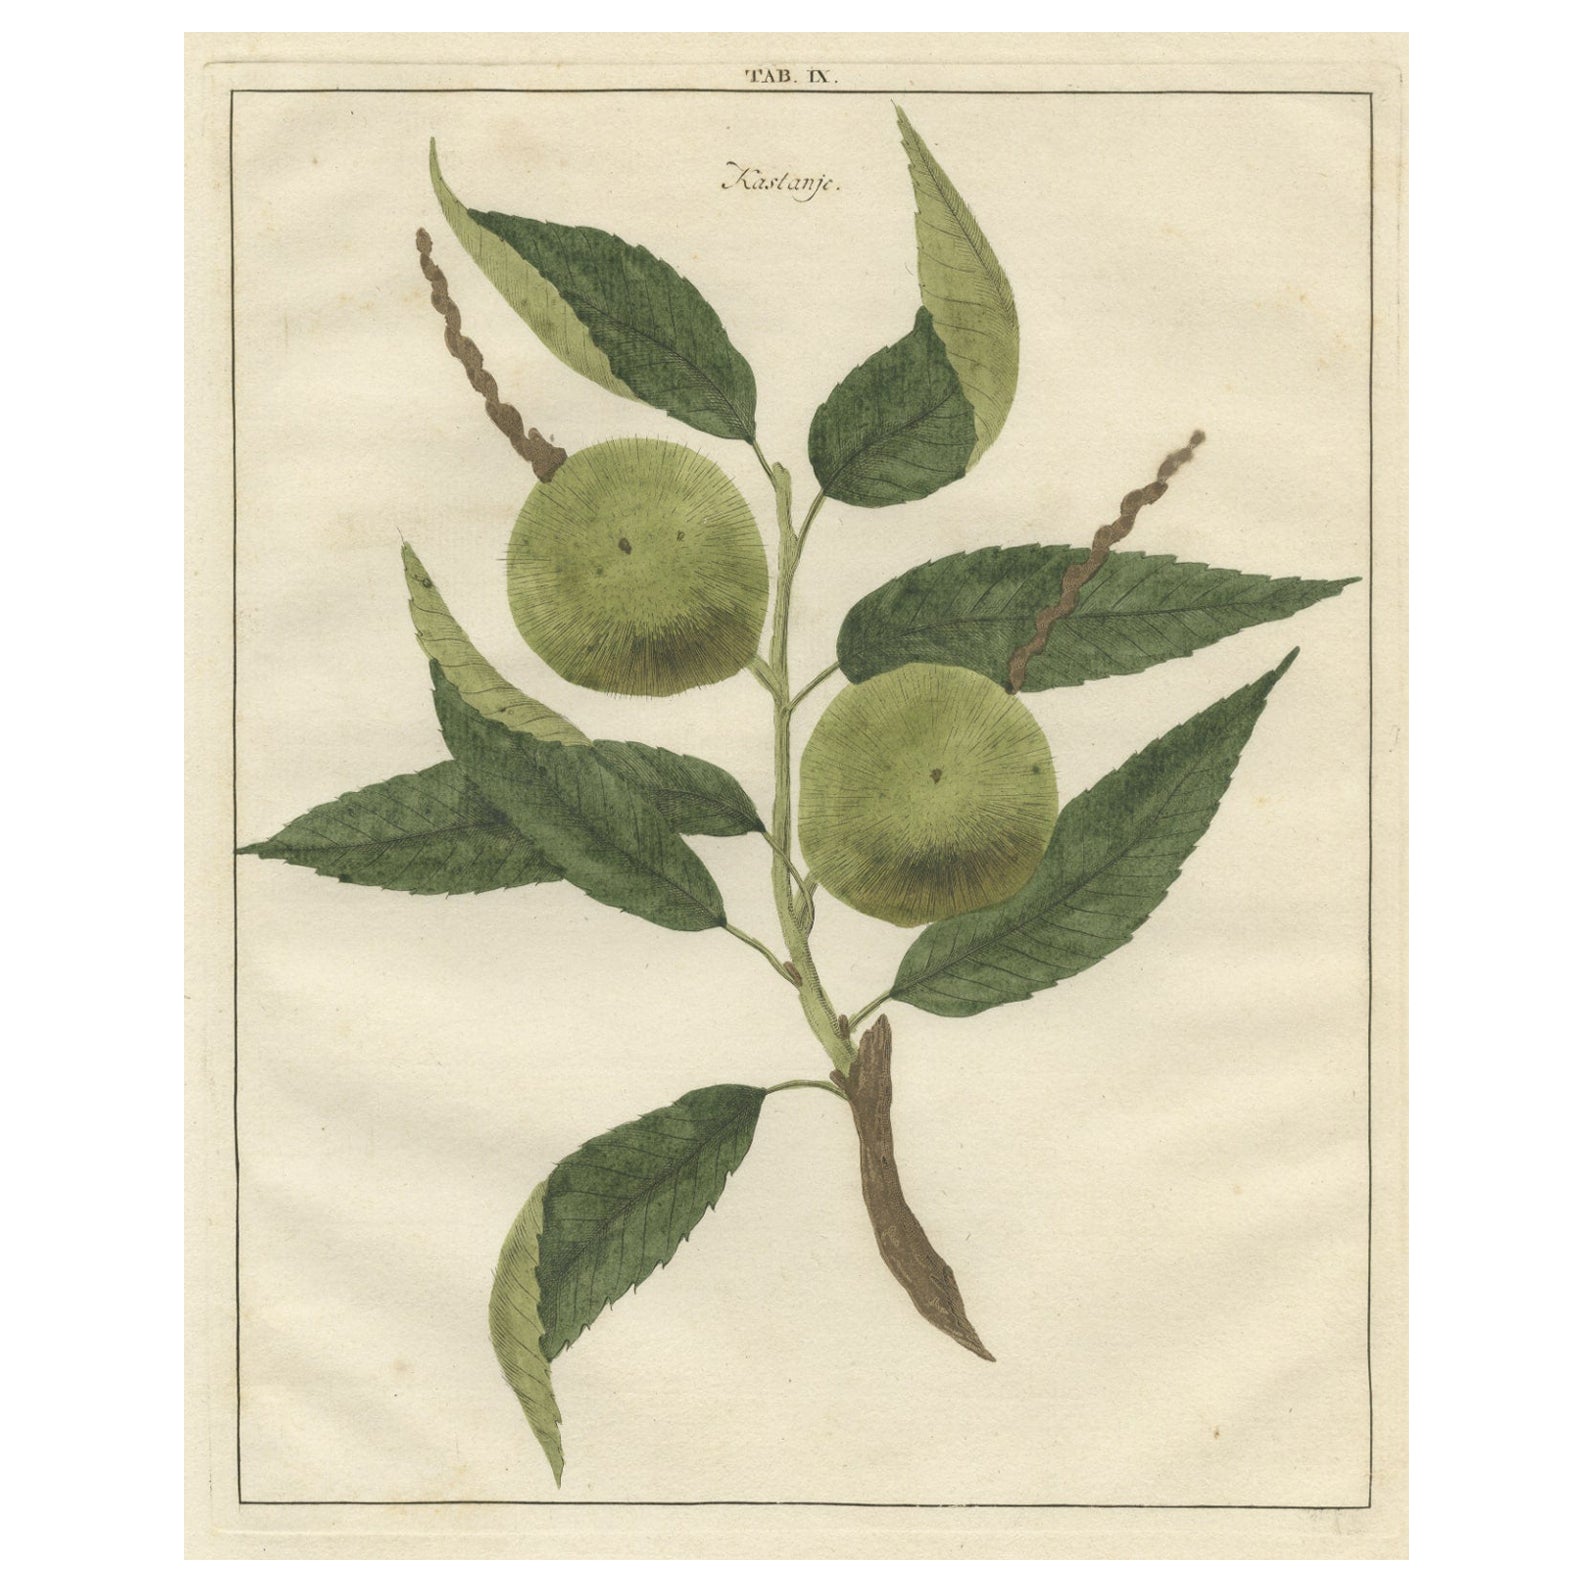 Antique Print of a Chestnut by Knoop, 1758